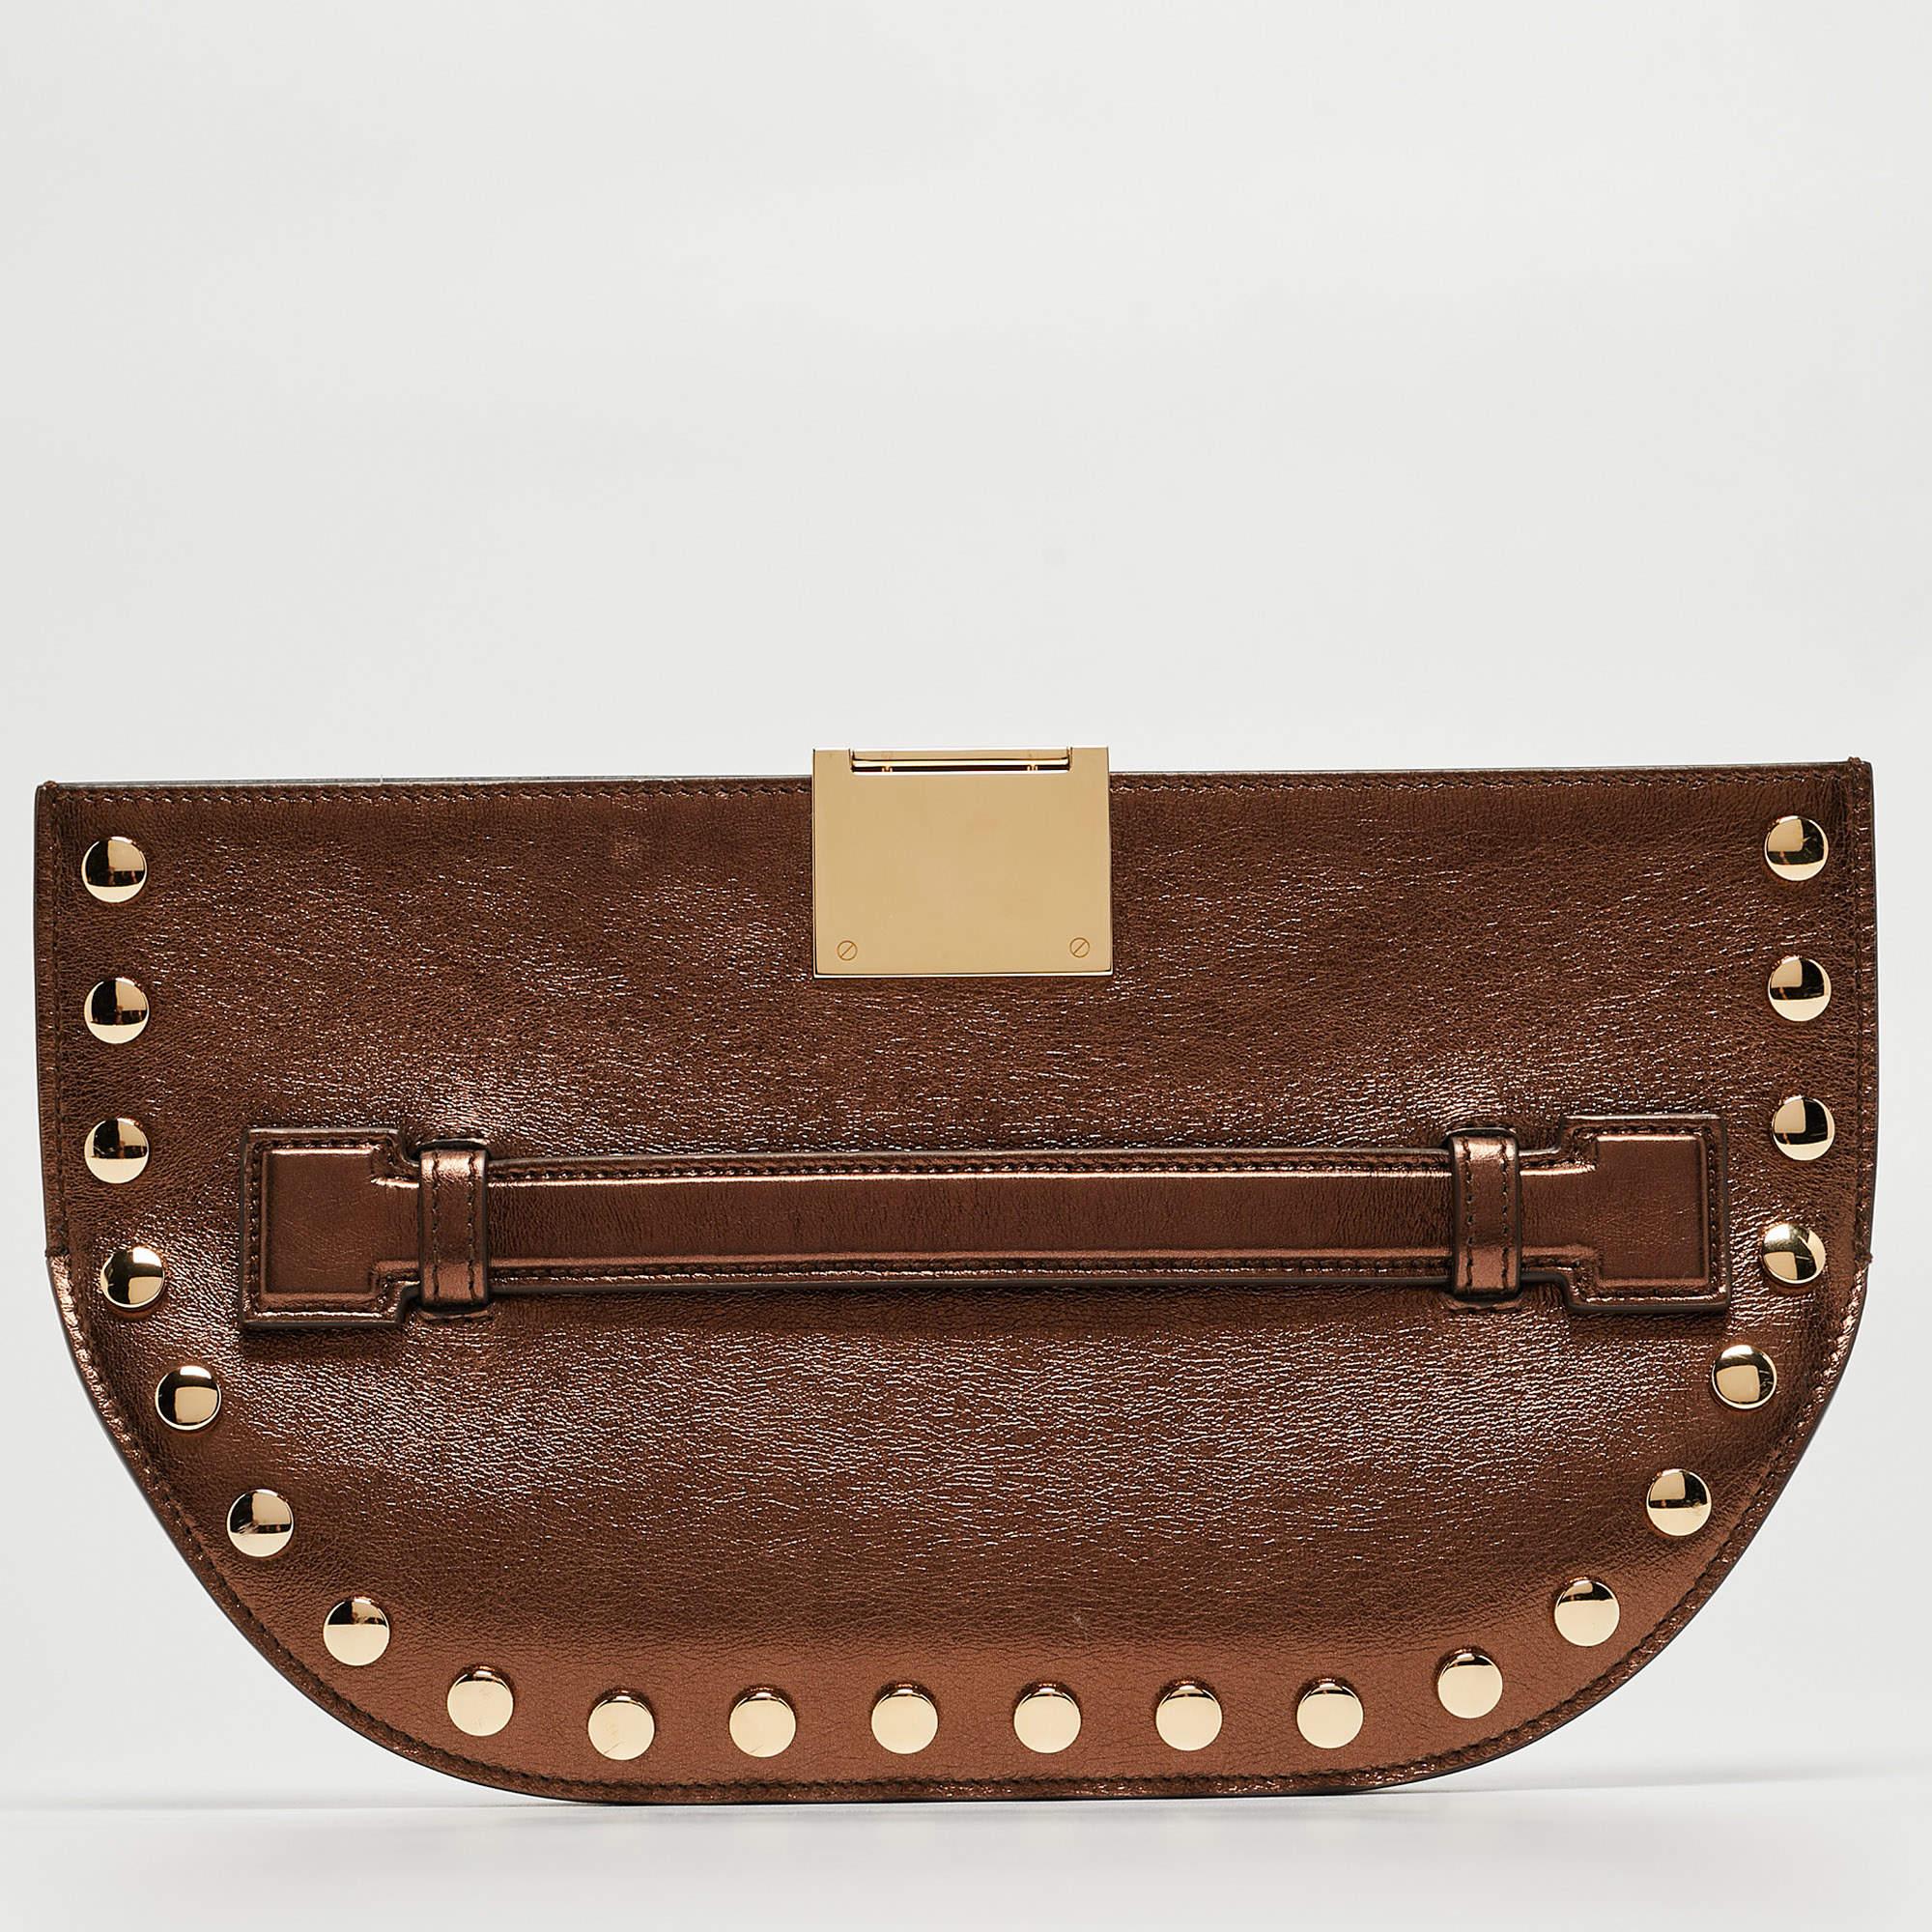 Burberry Bronze Leather Studded Olympia Clutch For Sale 4